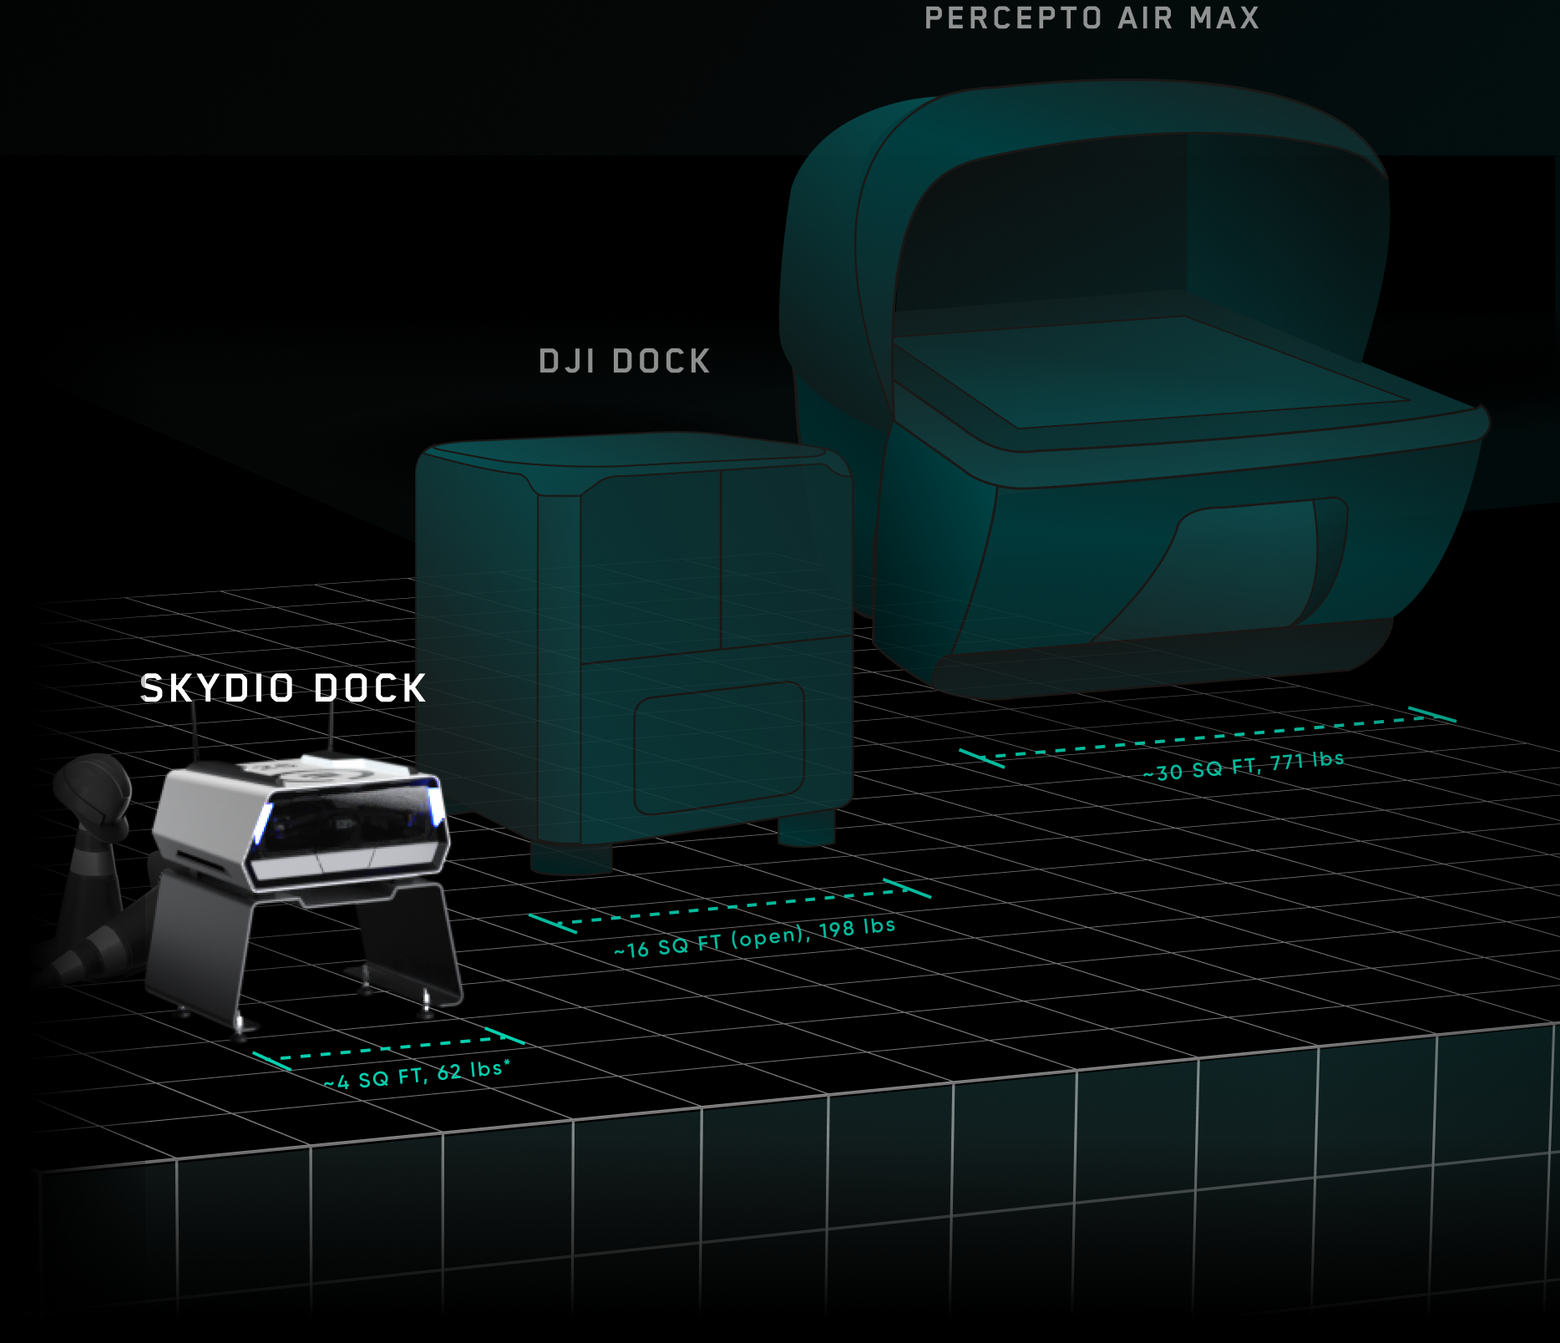 Skydio Dock takes up 4 Sq ft of space compared to our competitors at 16 sq ft and 30 sq ft